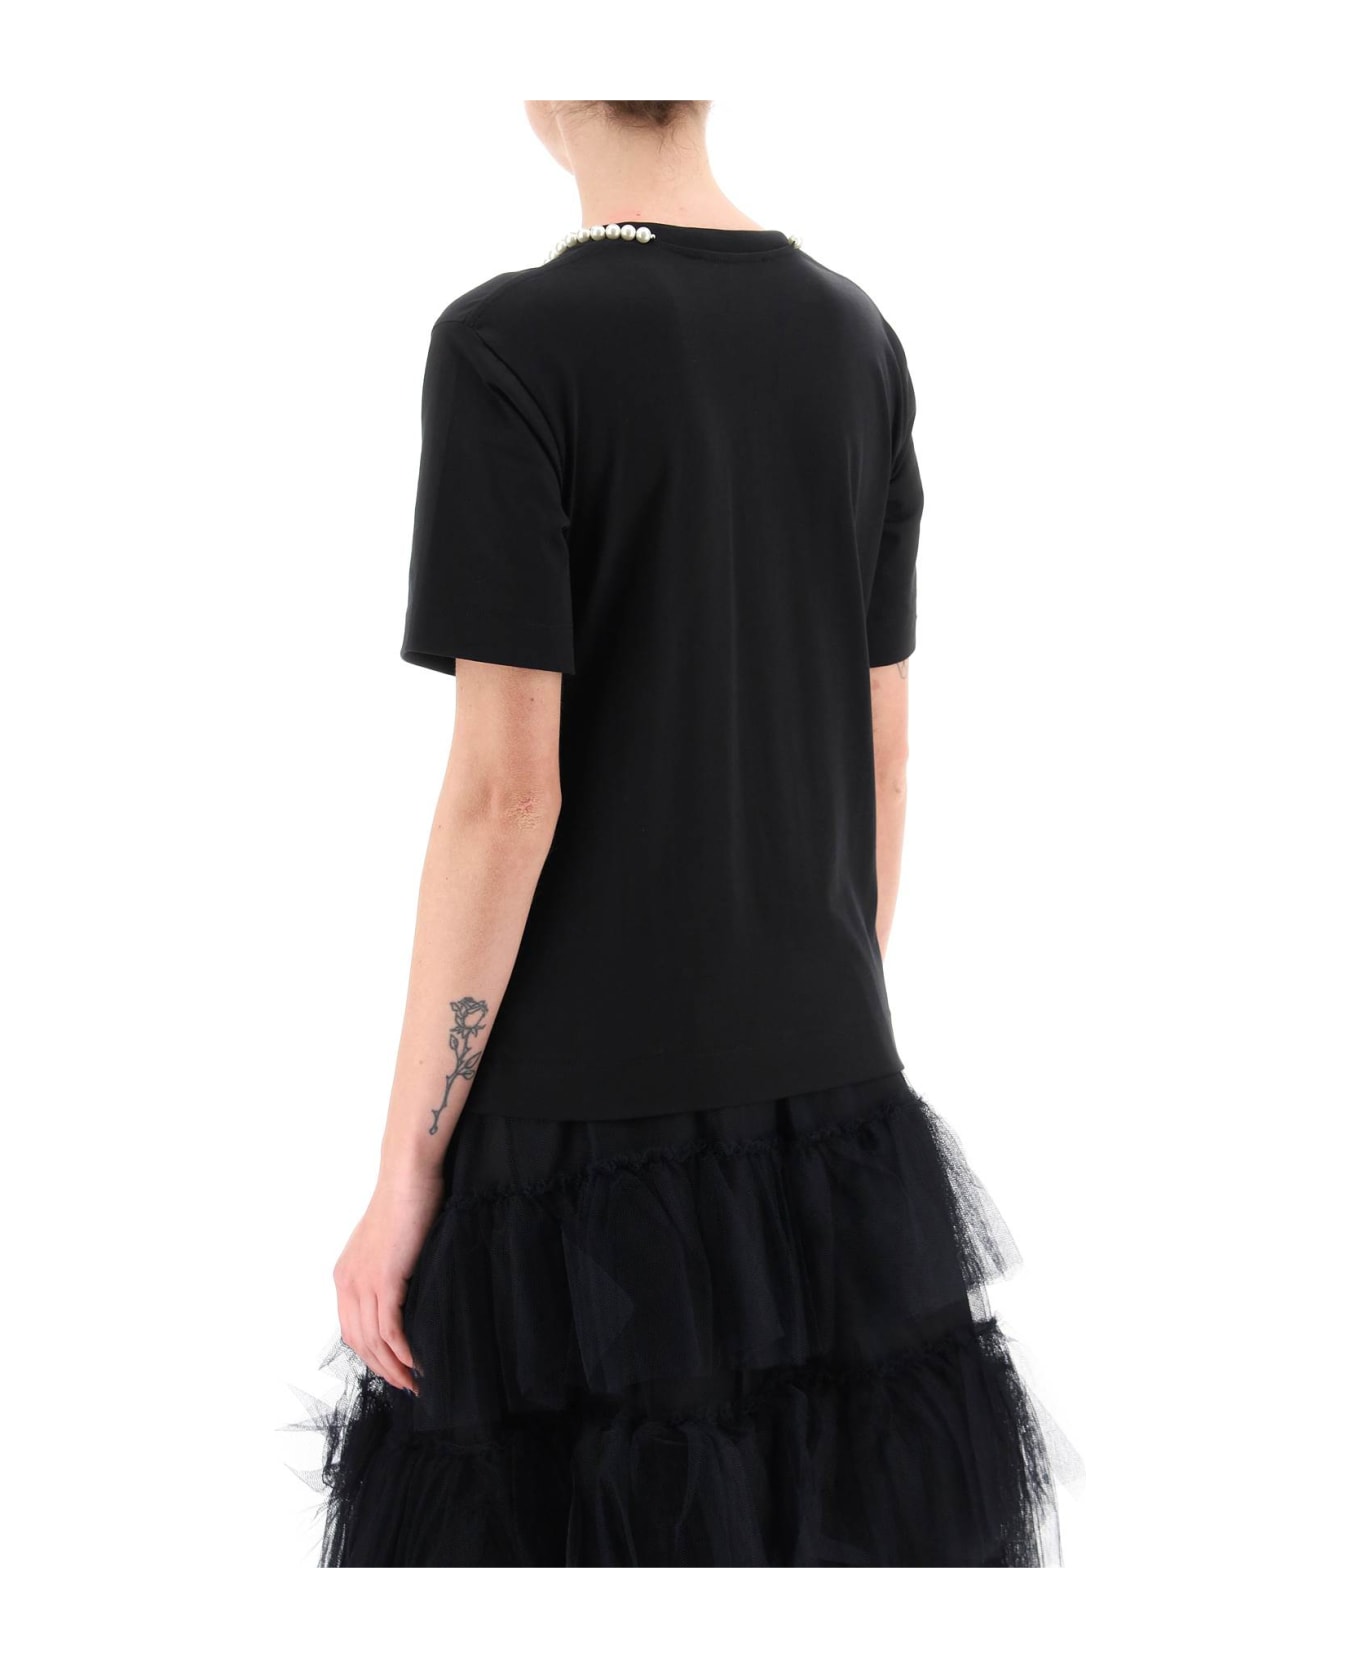 Simone Rocha T-shirt With Heart-shaped Cut-out And Pearls - BLACK PEARL (Black)